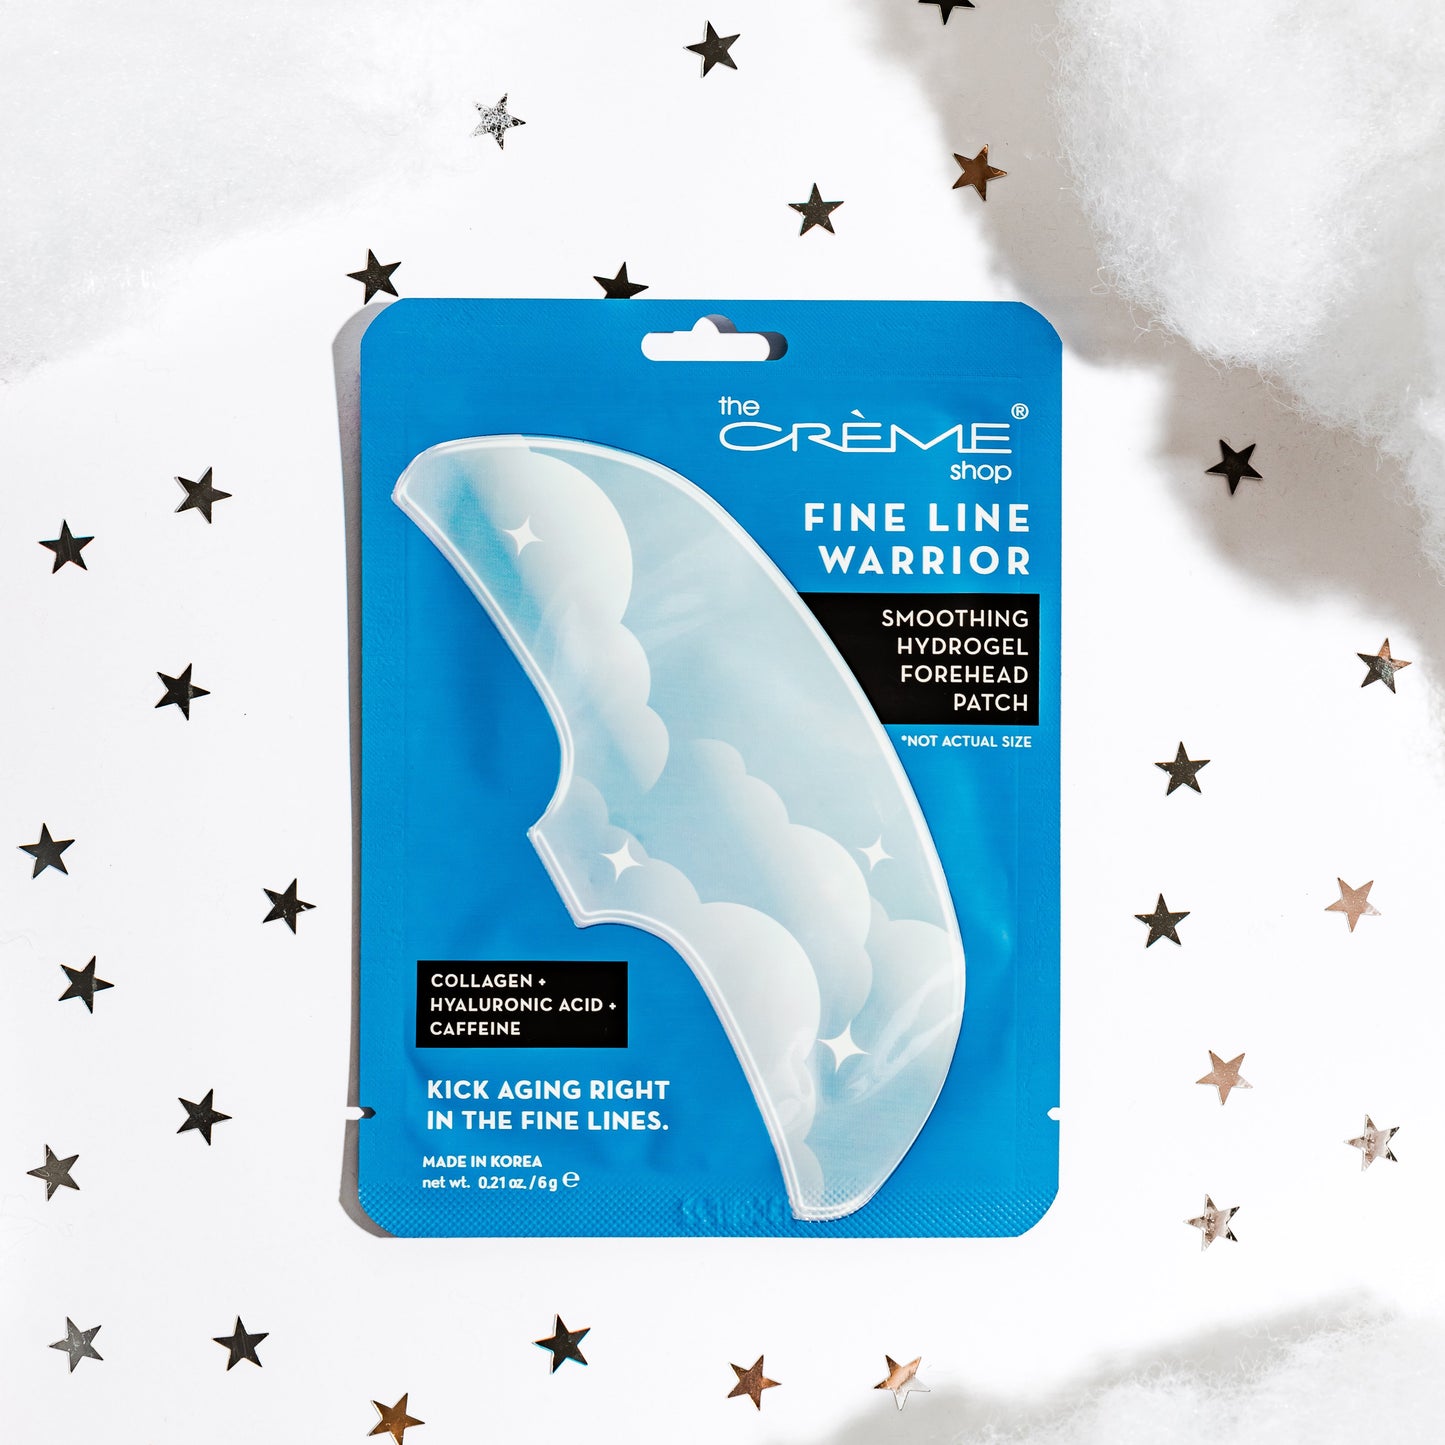 Fine Line Warrior - Smoothing Hydrogel Forehead Patch - Kick Aging Right in the Fine Lines Forehead Patches - The Crème Shop 